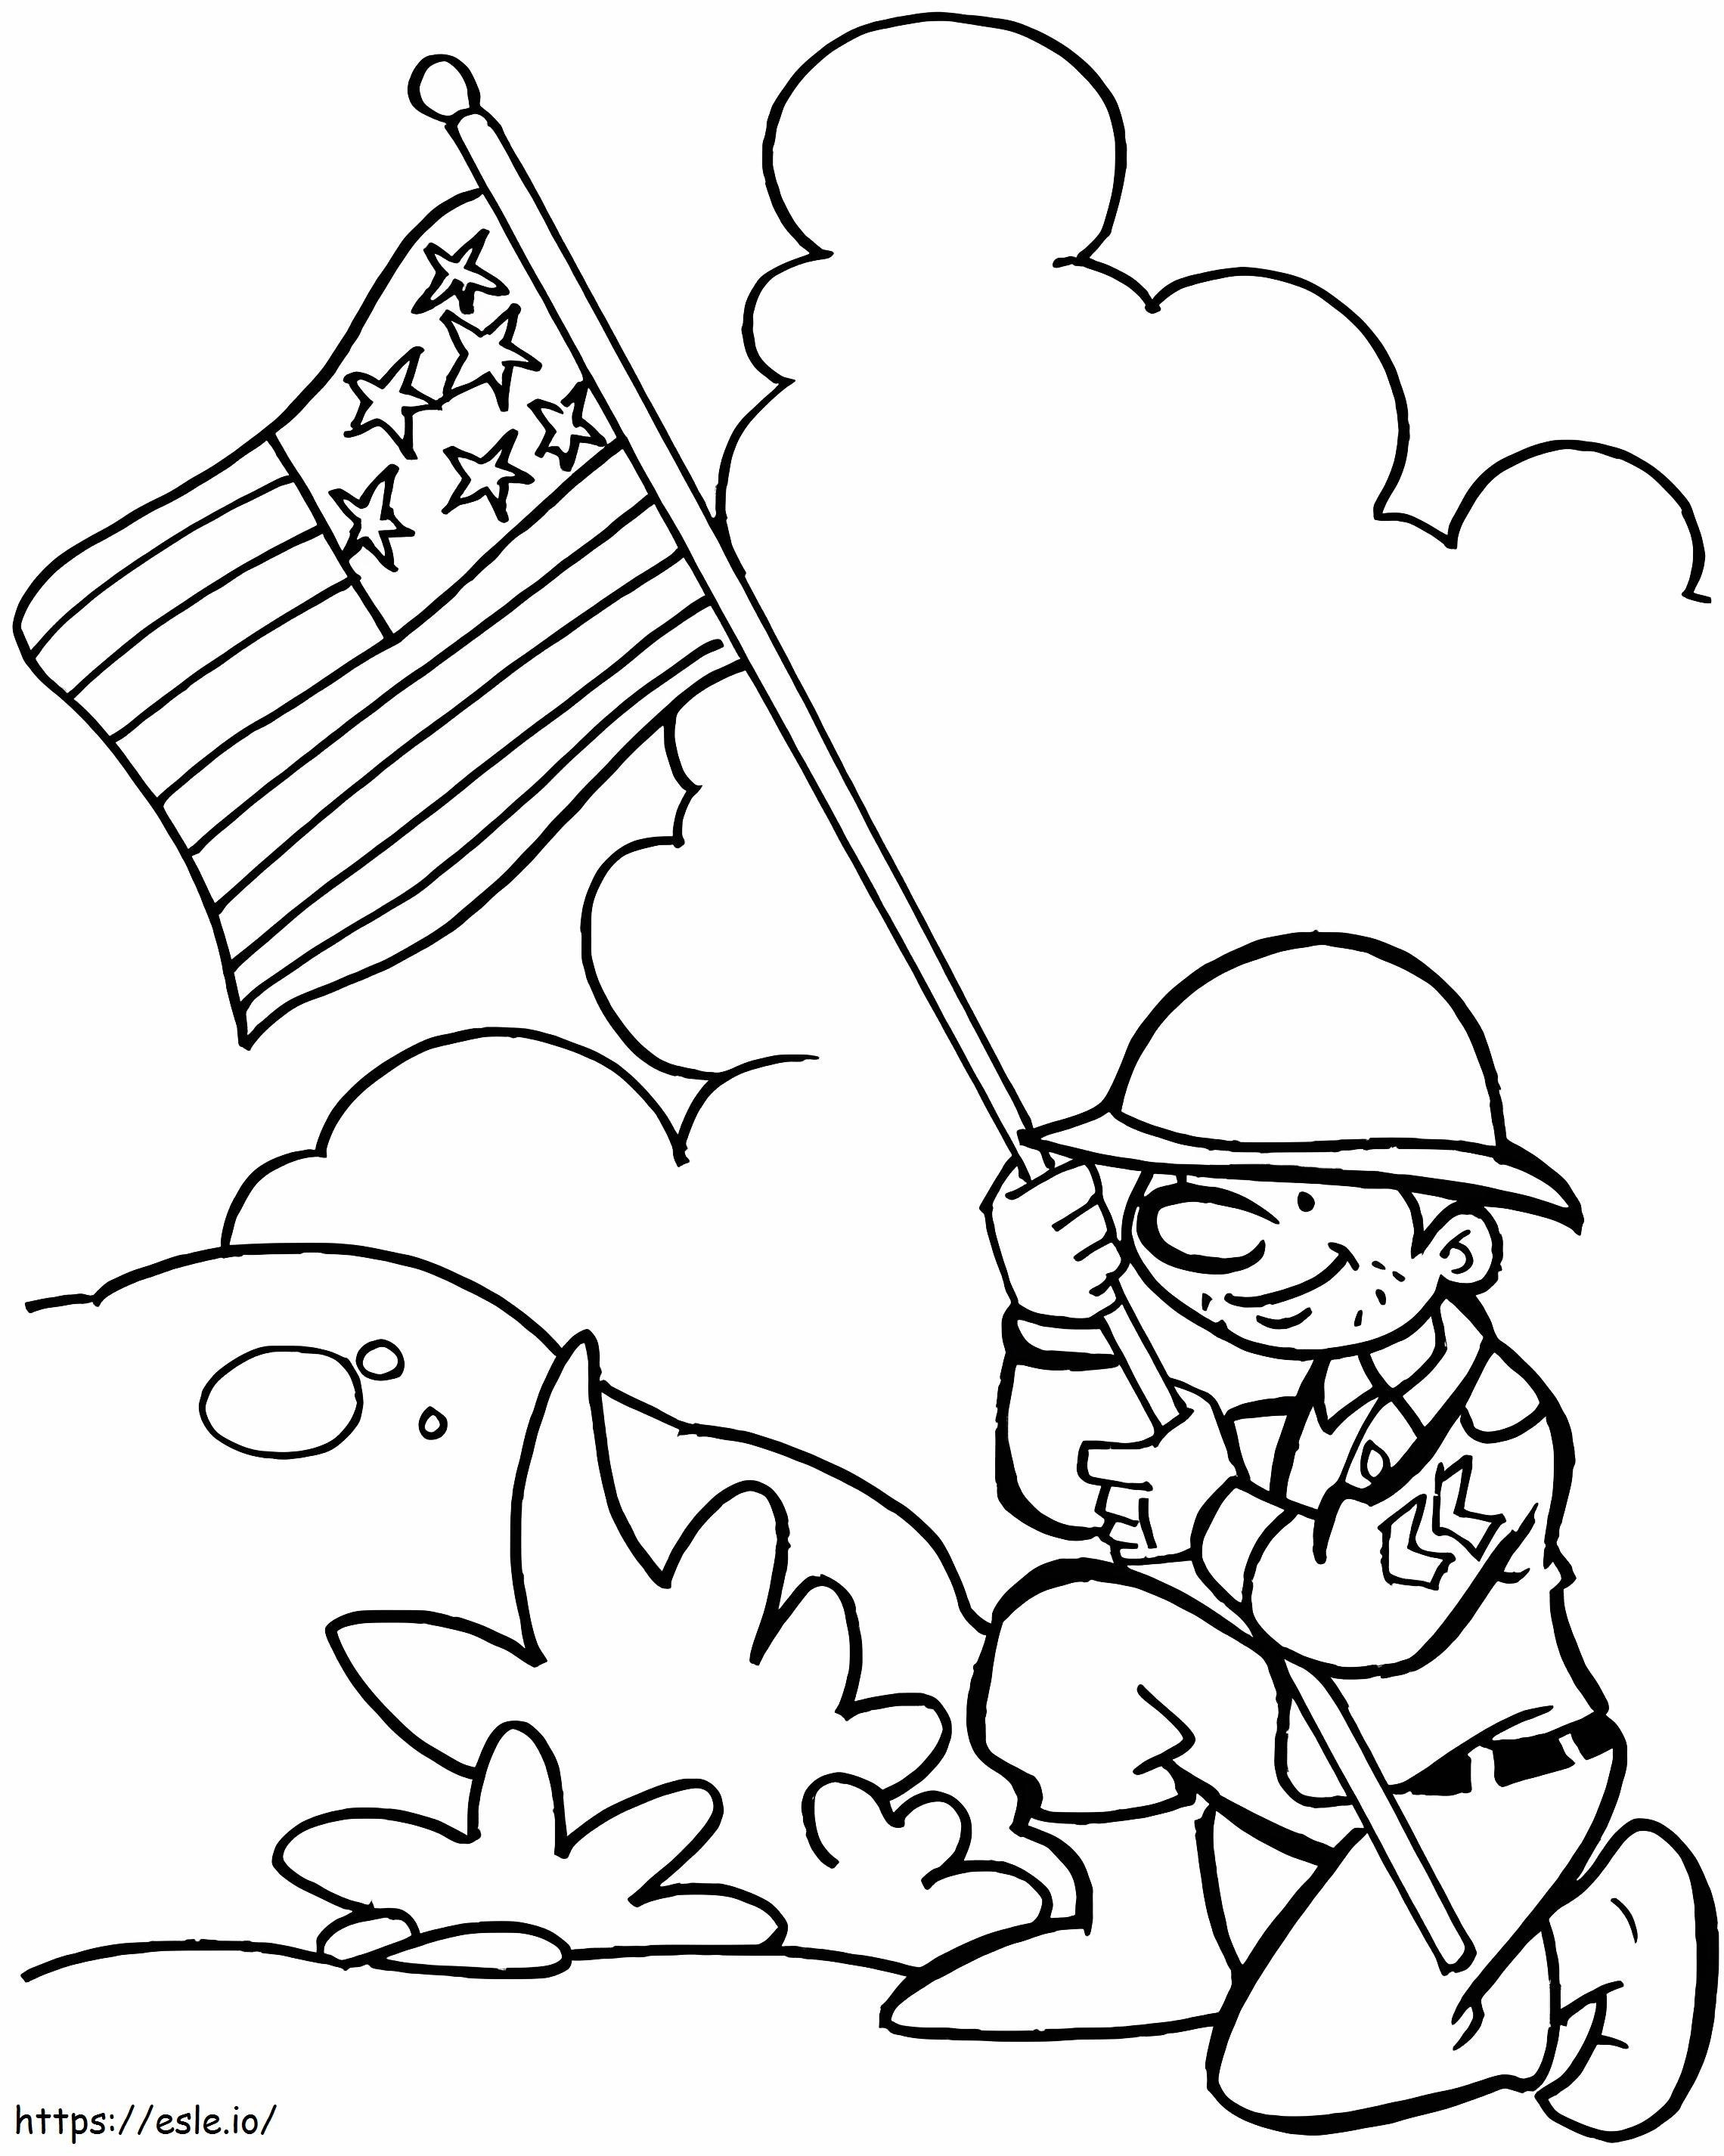 Veterans Day 6 coloring page